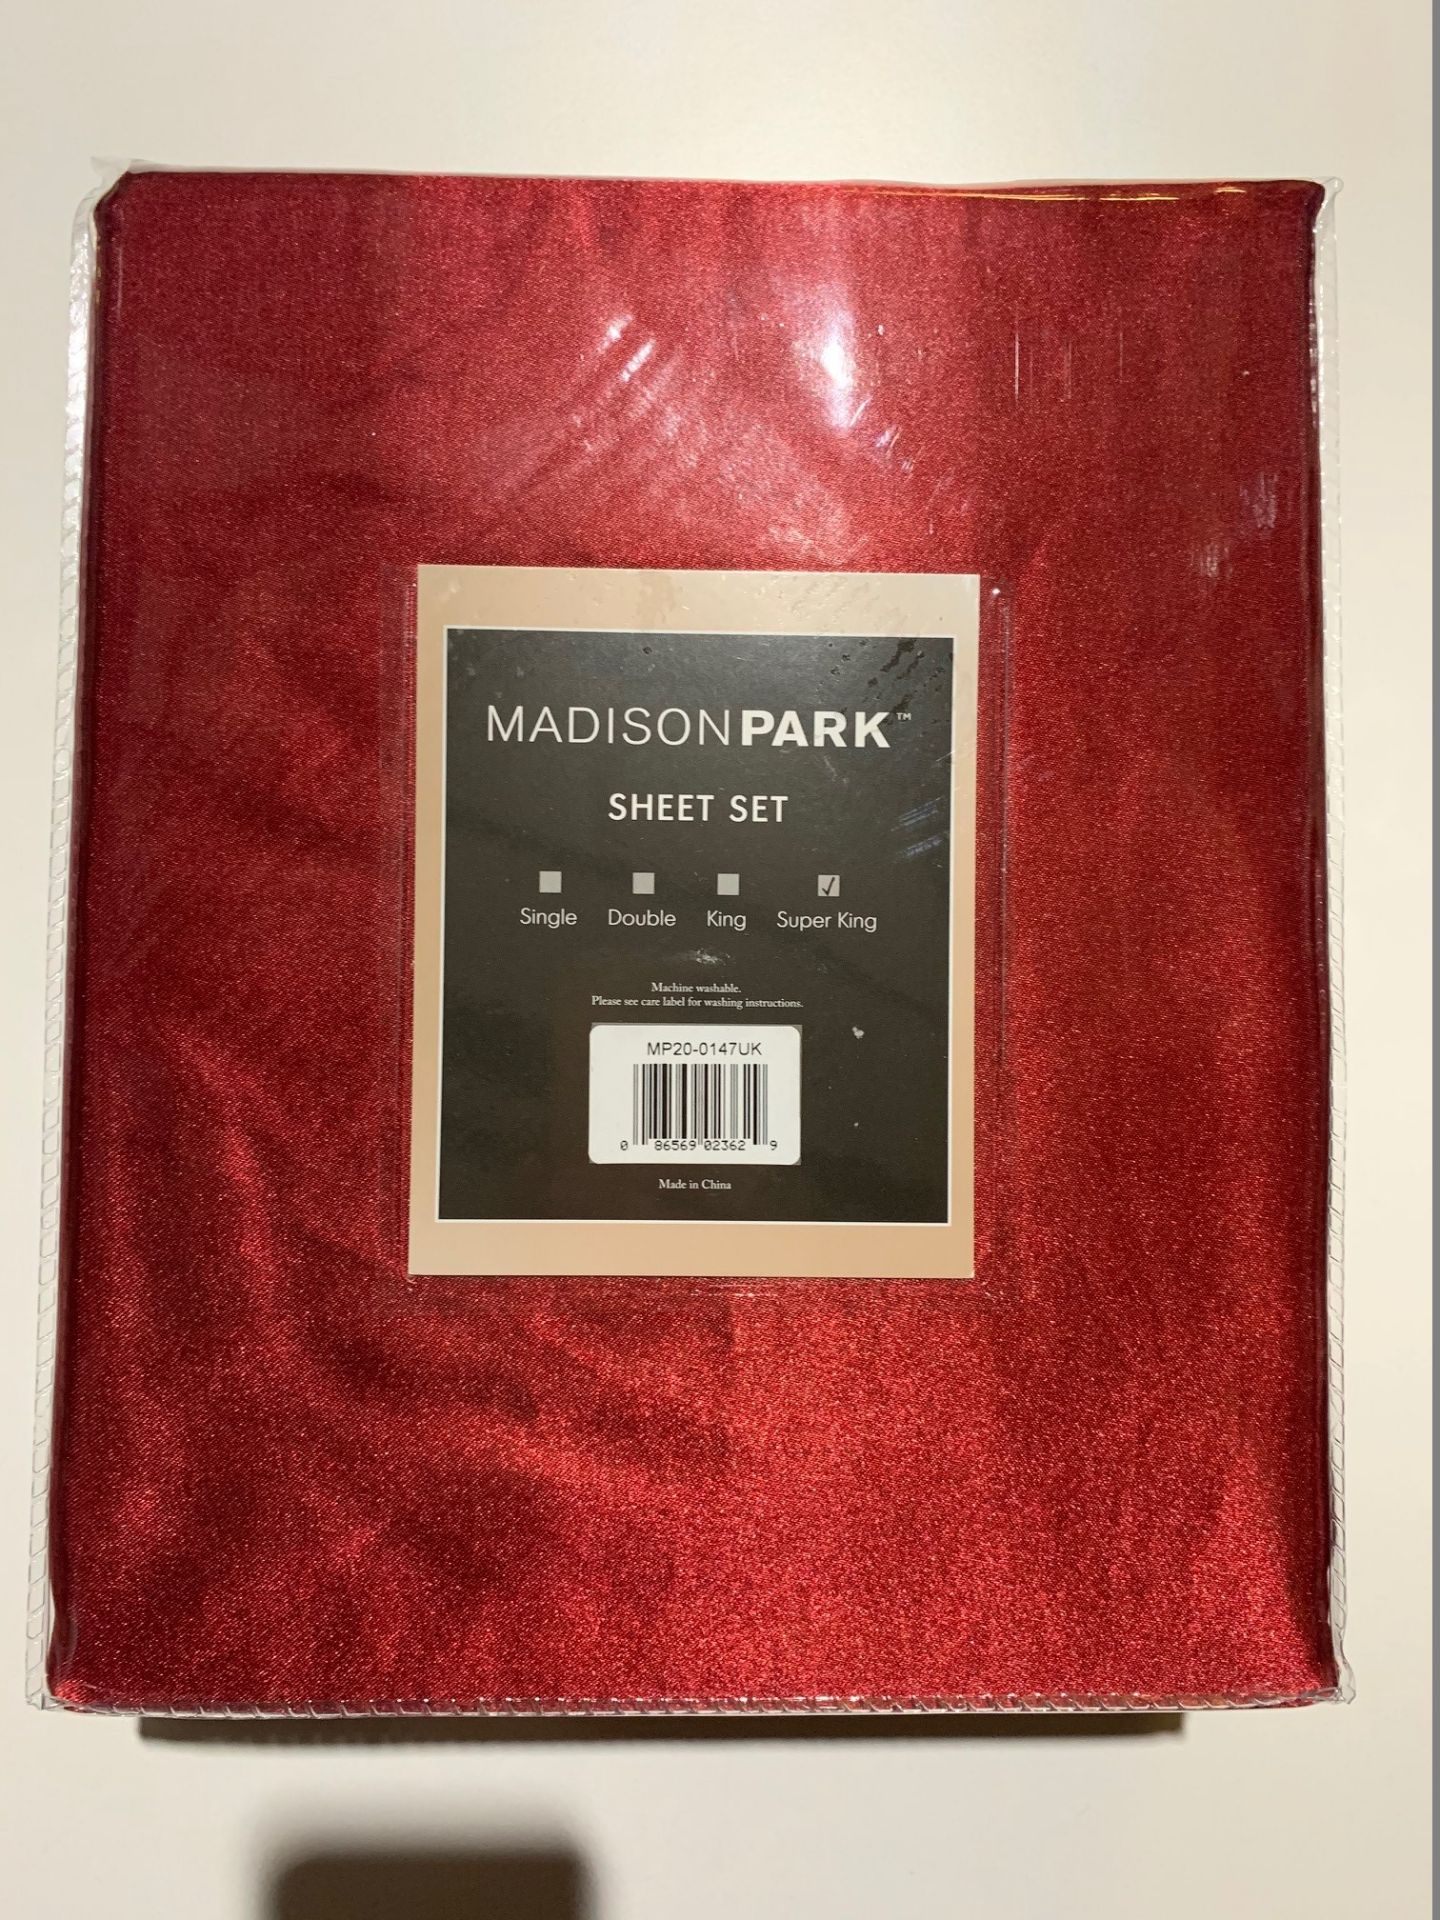 1 x Madison Park Super King Sheet Set Red - Includes Fitted Sheet, Flat Sheet and Pillowcases -